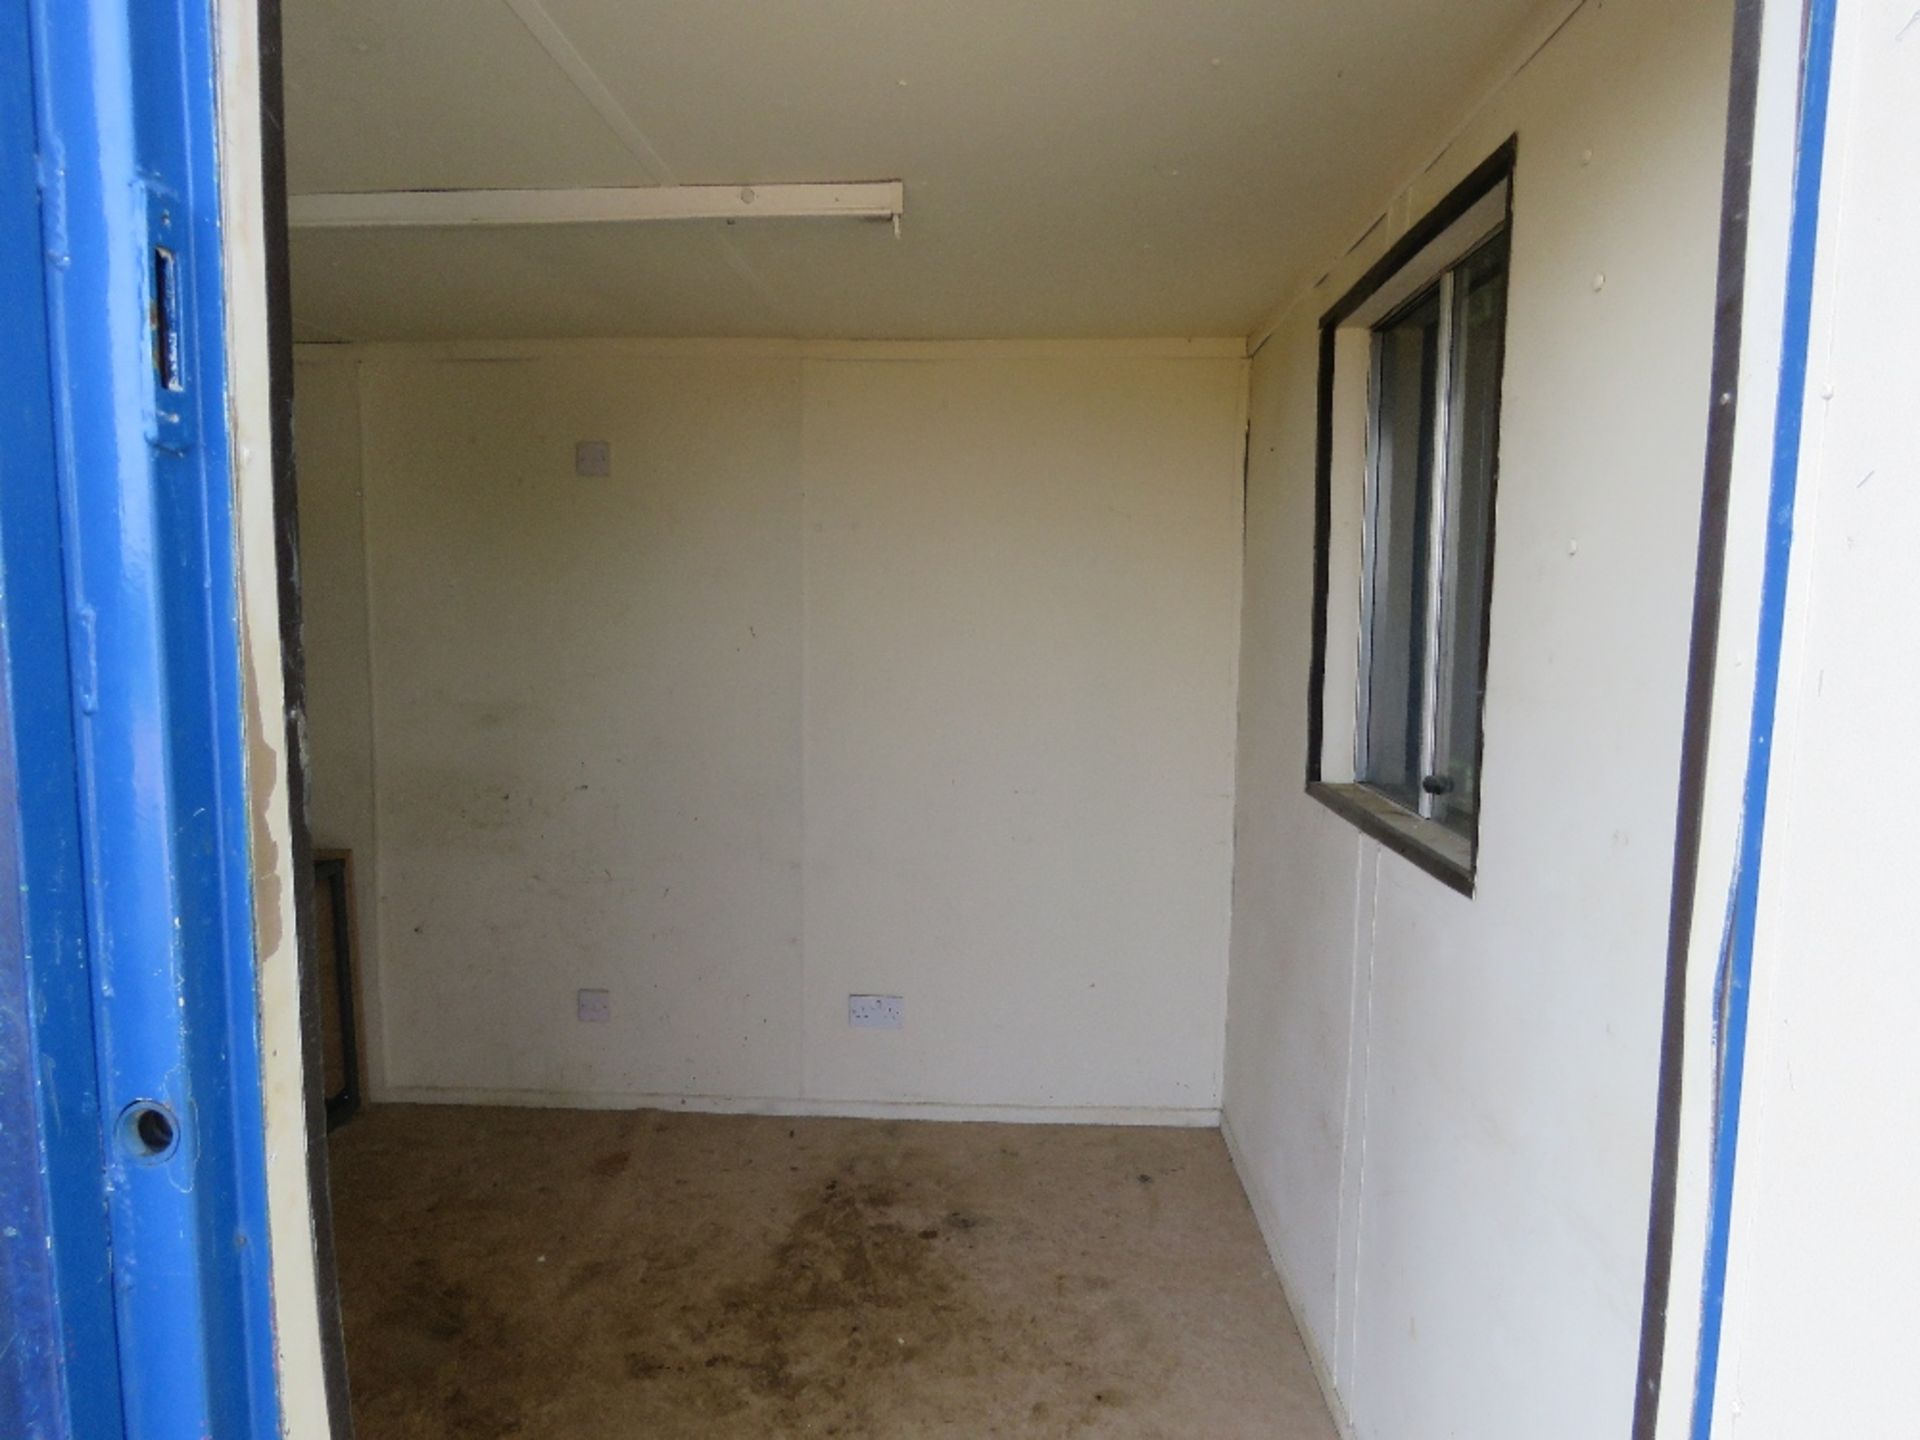 SECURE STEEL SITE OFFICE, OPEN PLAN LAYOUT. 20FT LENGTH X 9FT WIDTH APPROX. WITH KEYS, UNLOCKED. SO - Image 6 of 7